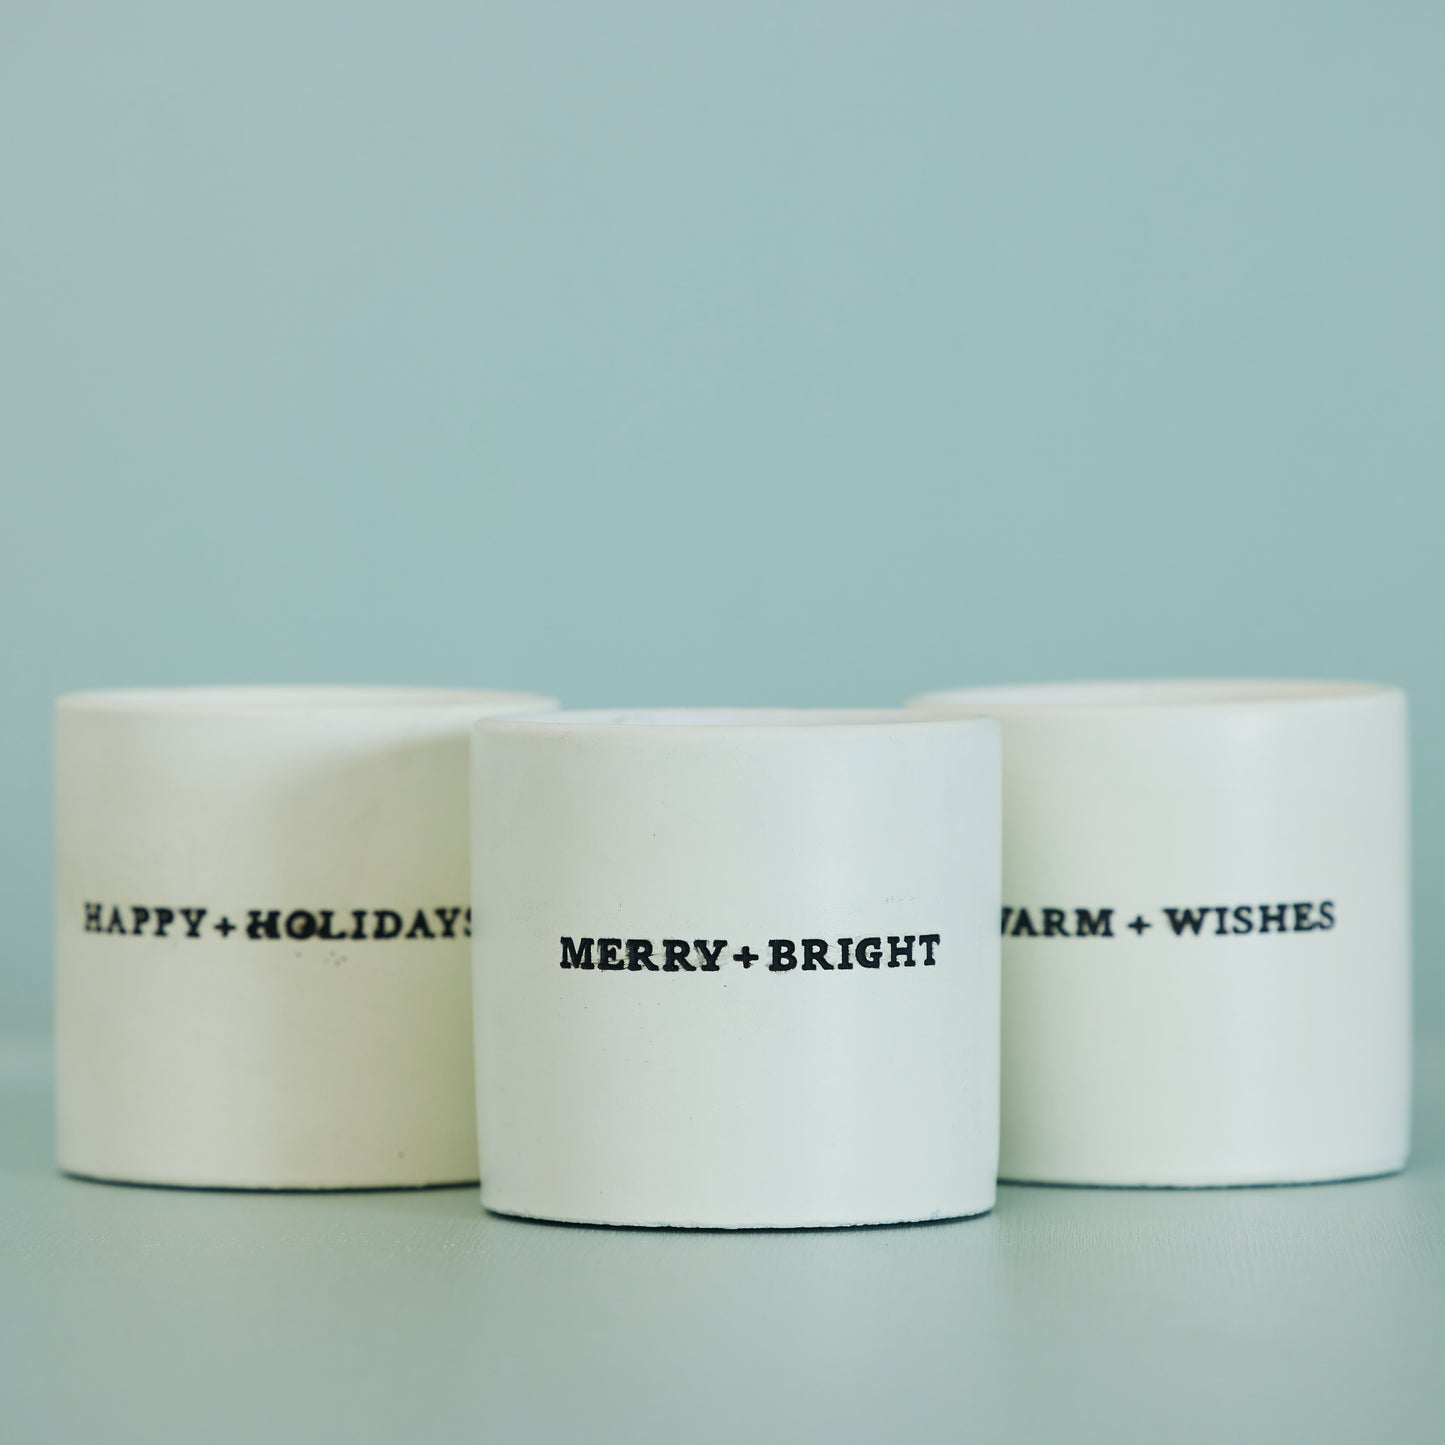 Holiday Containers